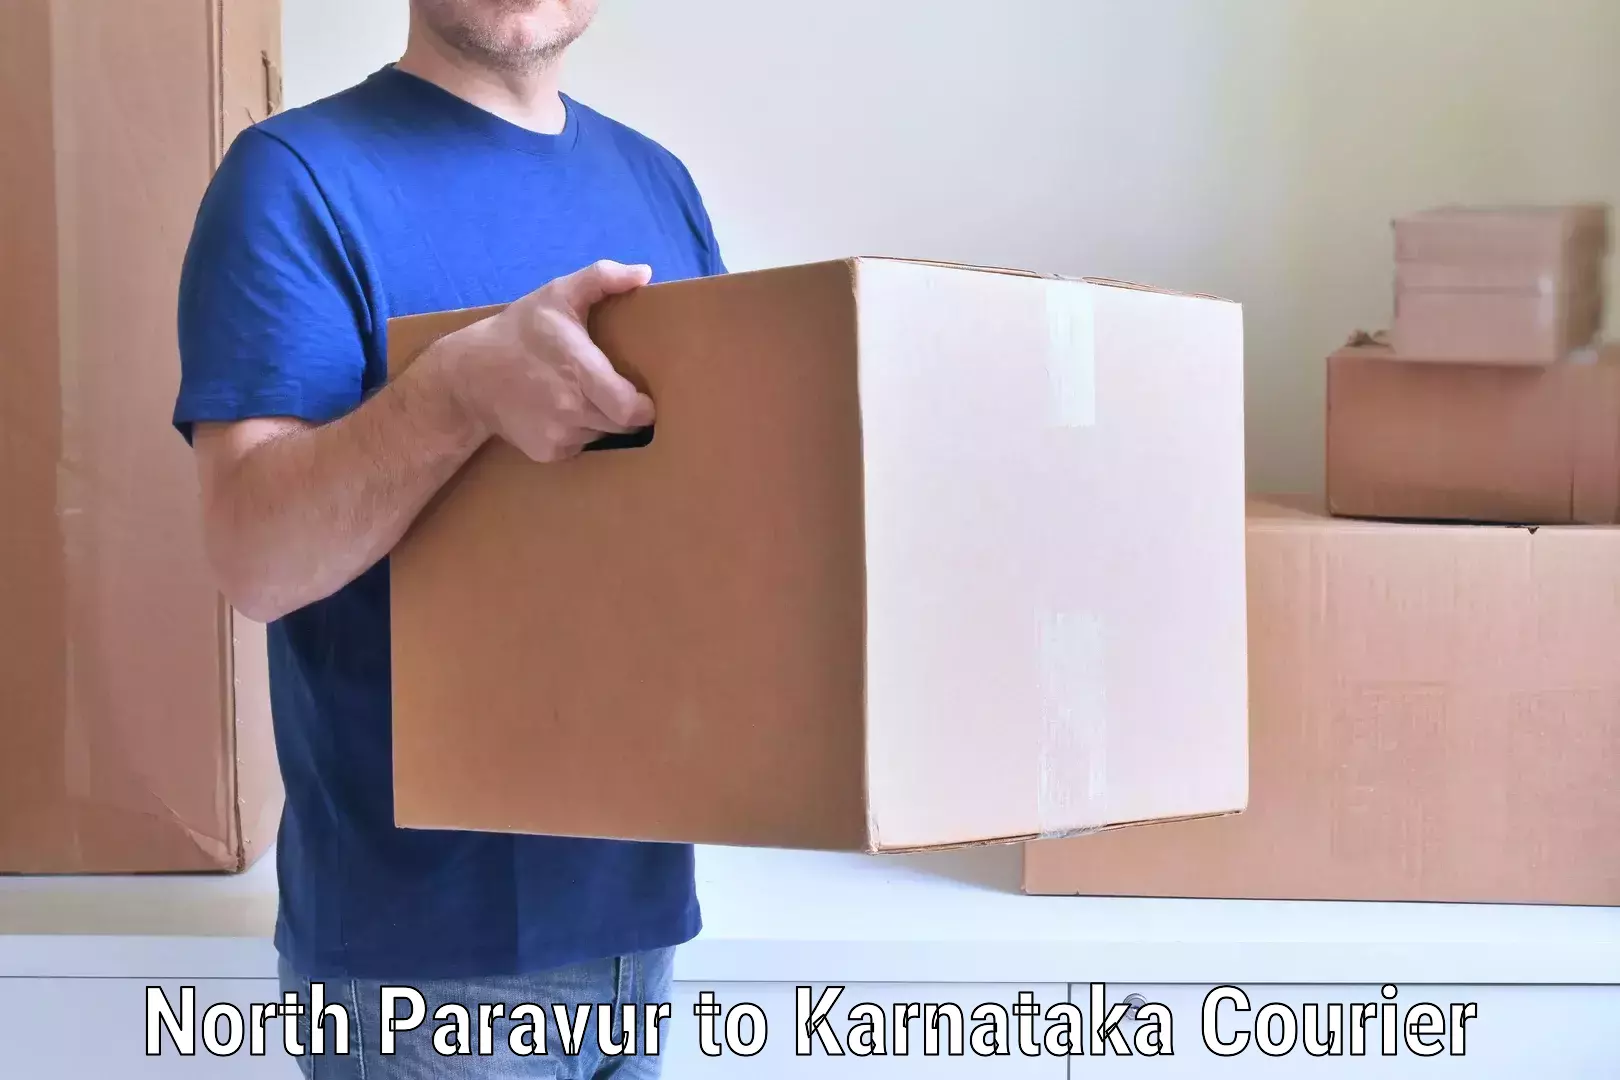 Professional movers and packers North Paravur to Karnataka